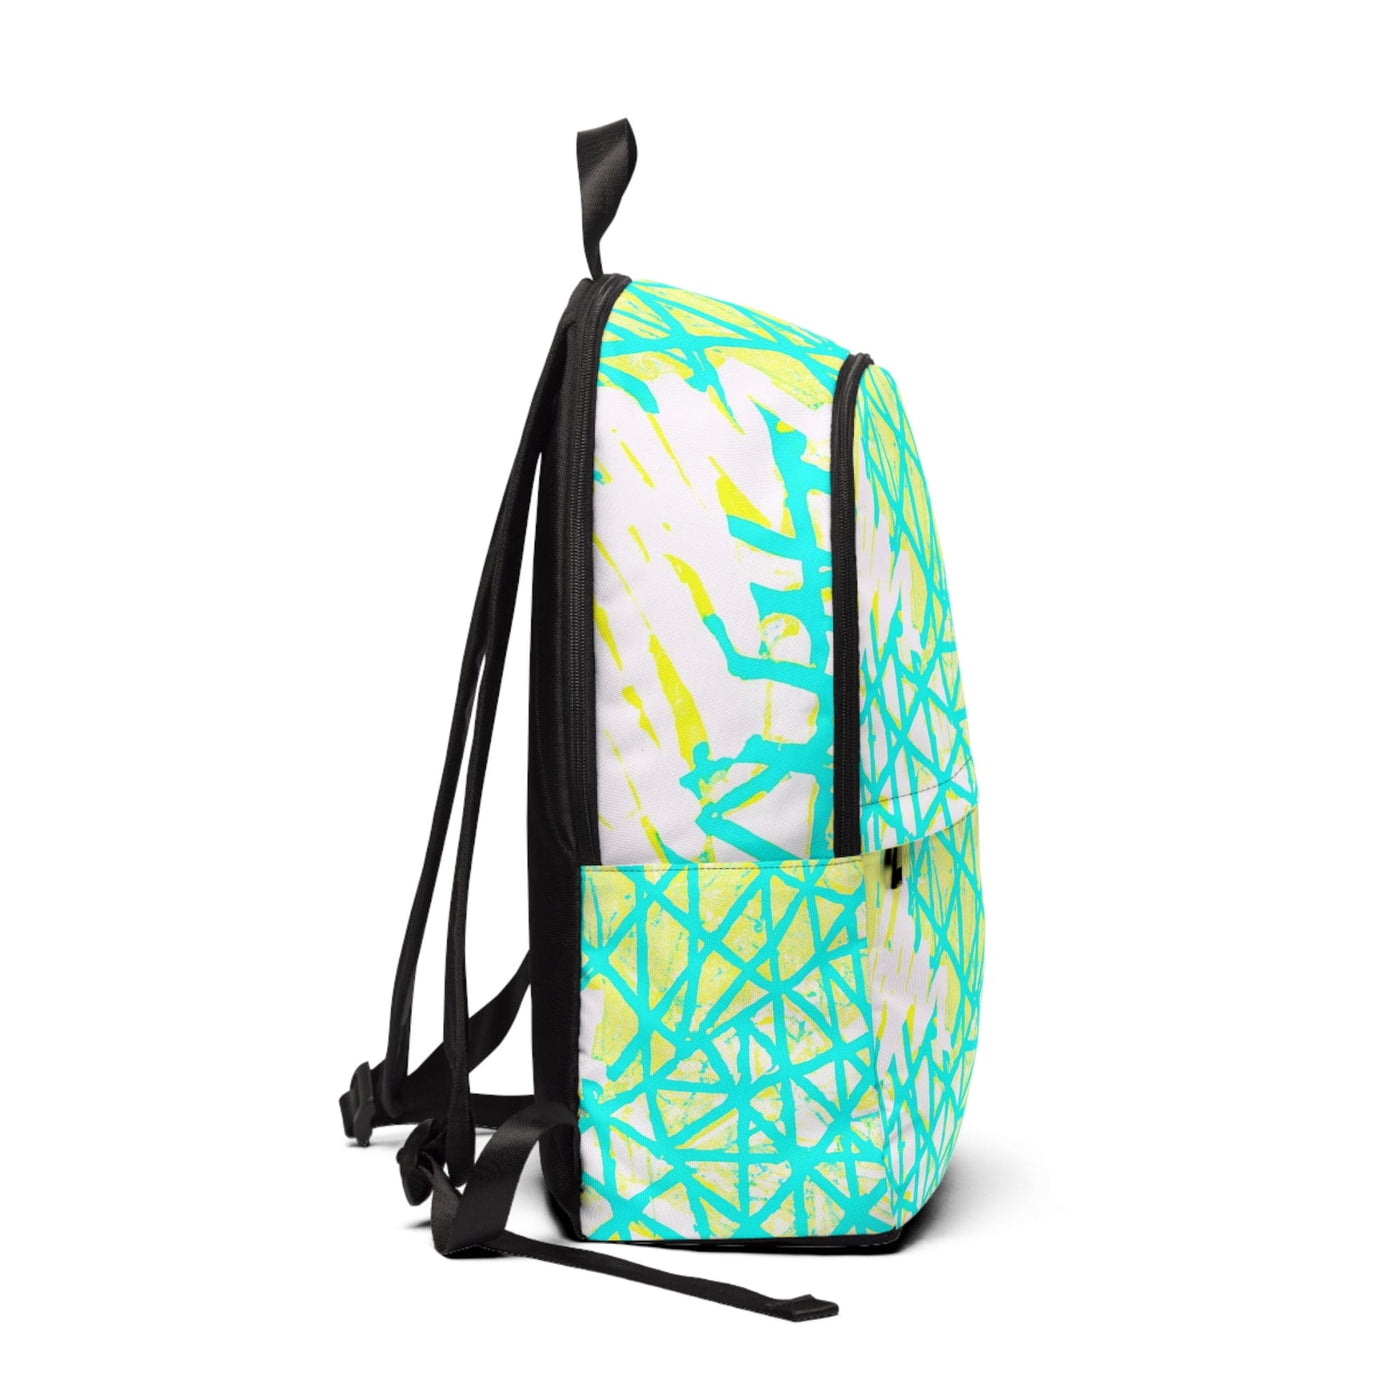 Fashion Backpack Waterproof Cyan Blue Lime Green And White Pattern - Bags